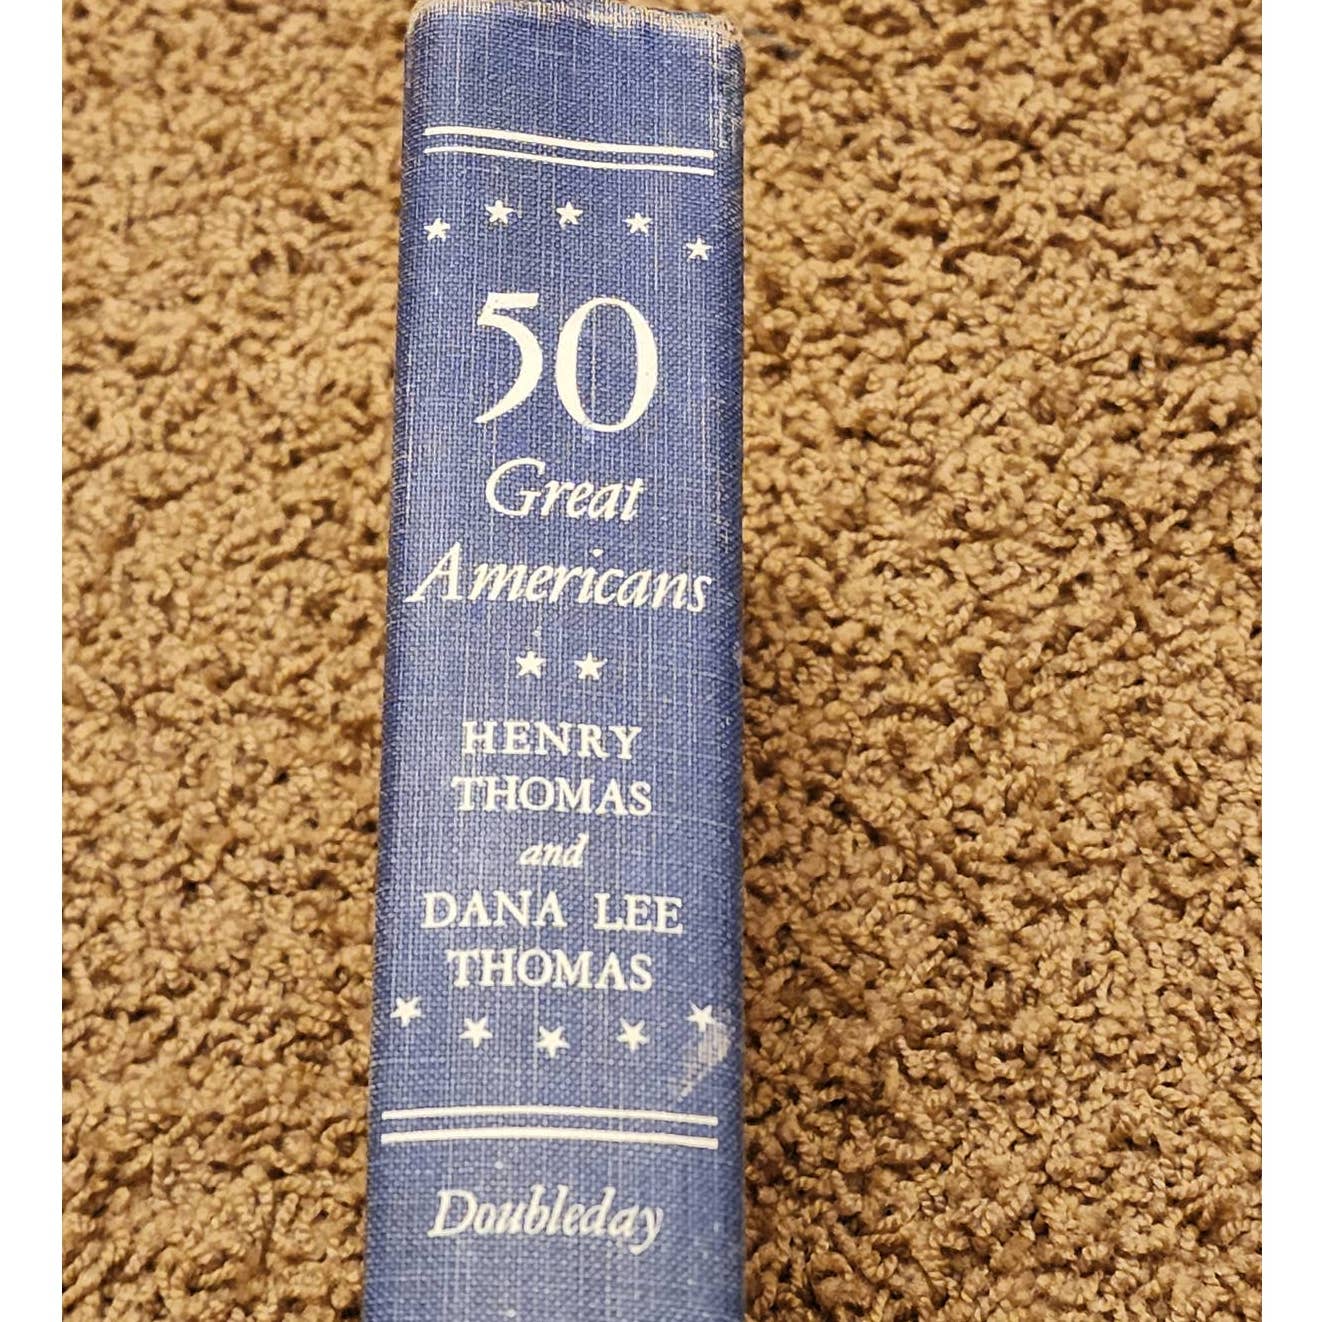 50 Great Americans Their Inspiring Lives Achievements By Henry Thomas, Vintage